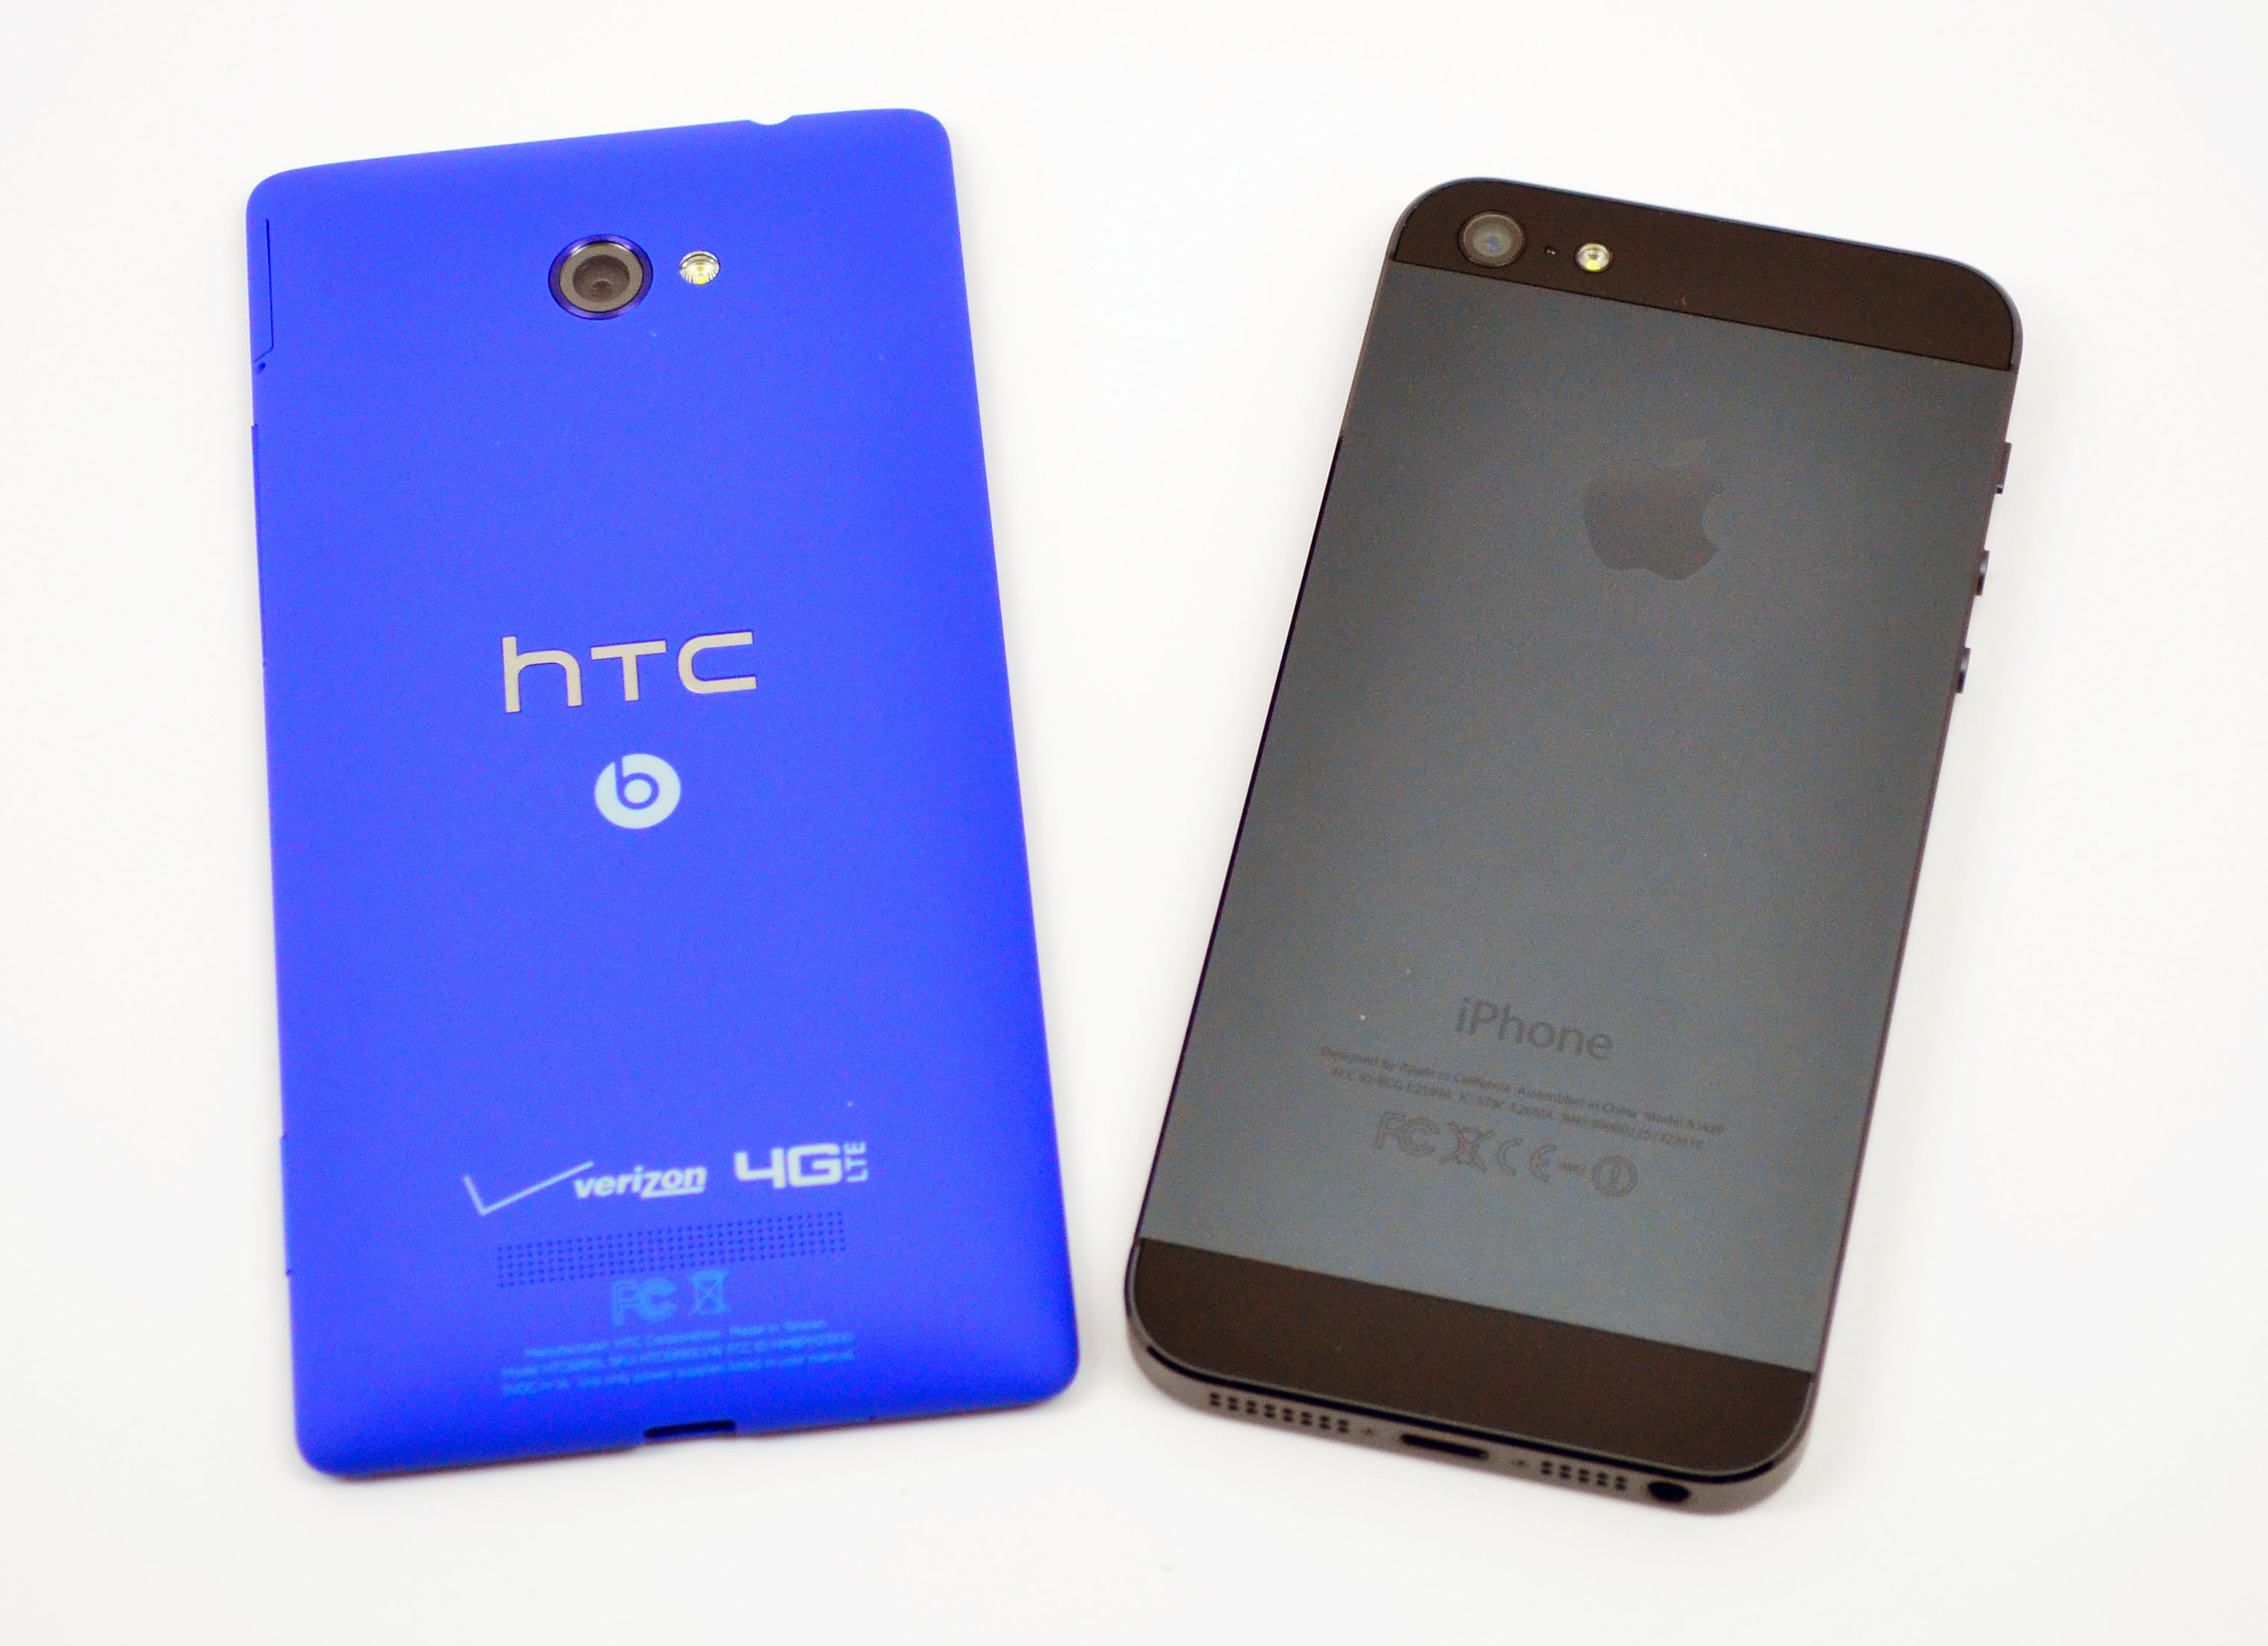 HTC 8X vs iPhone 5 Review - 02